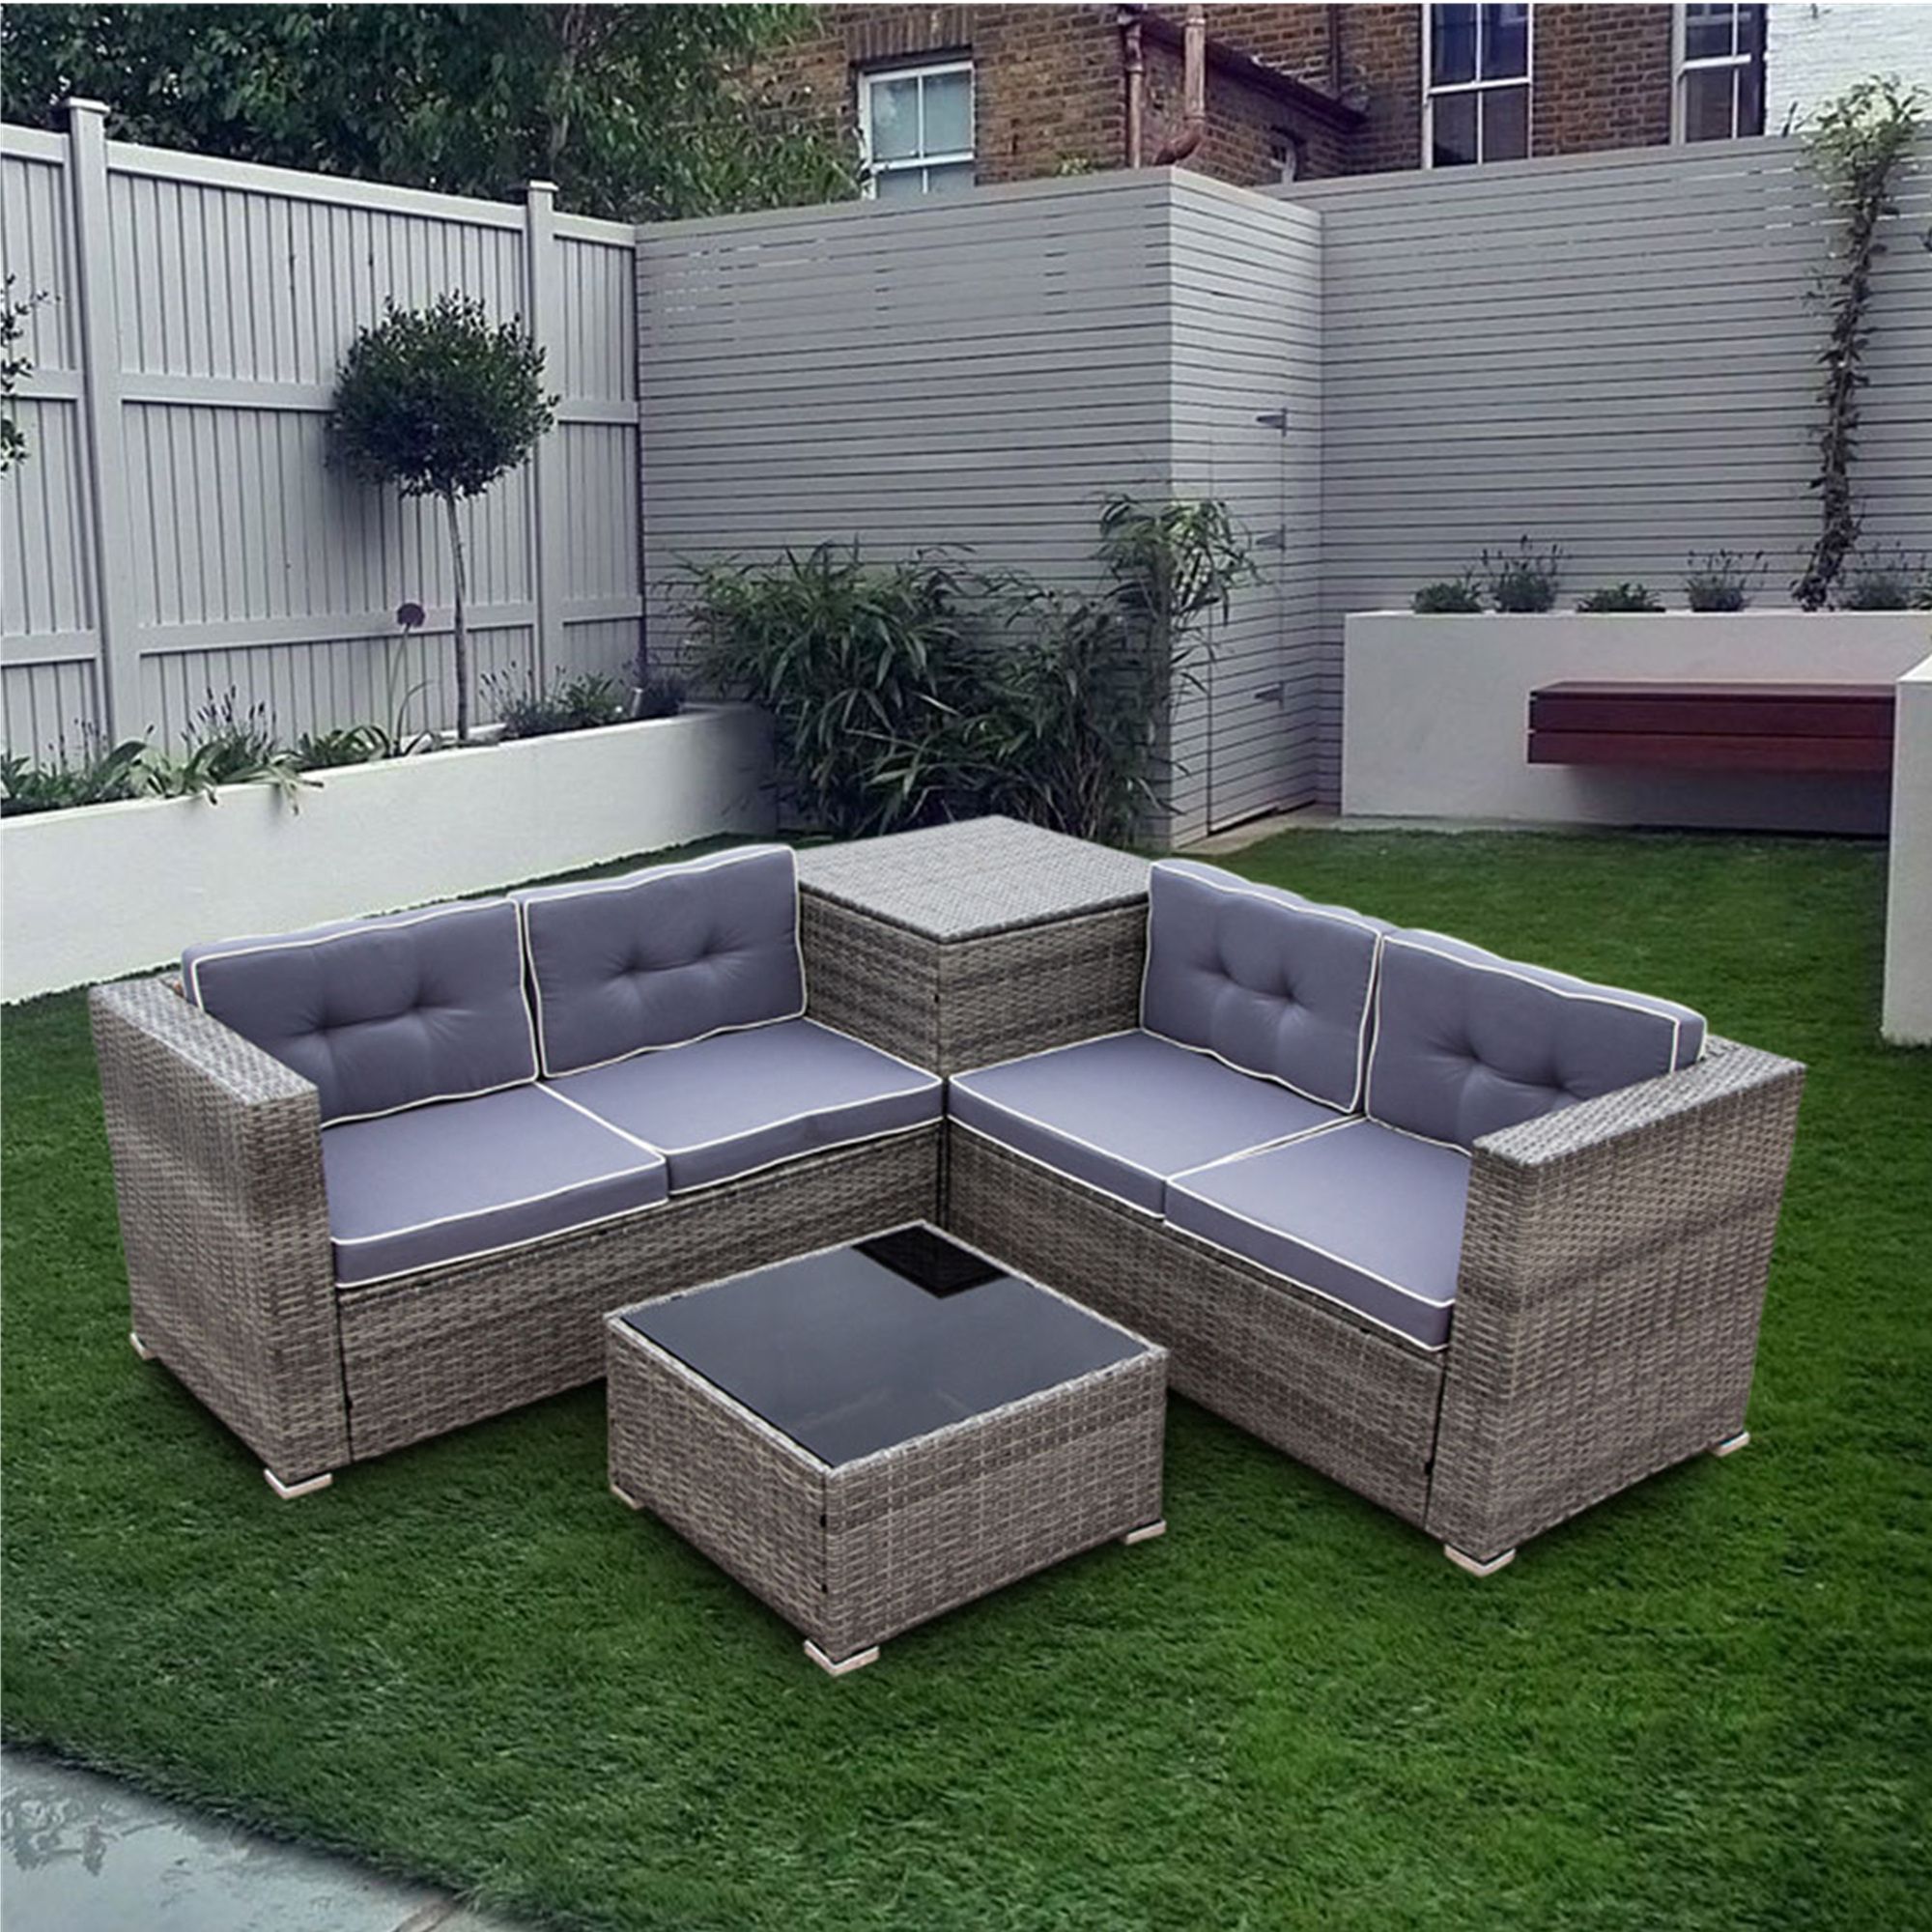 4 Piece Rattan Patio Furniture Sets Clearance, Wicker Bistro Patio Set With Regard To 4 Piece Outdoor Wicker Seating Sets (View 3 of 15)